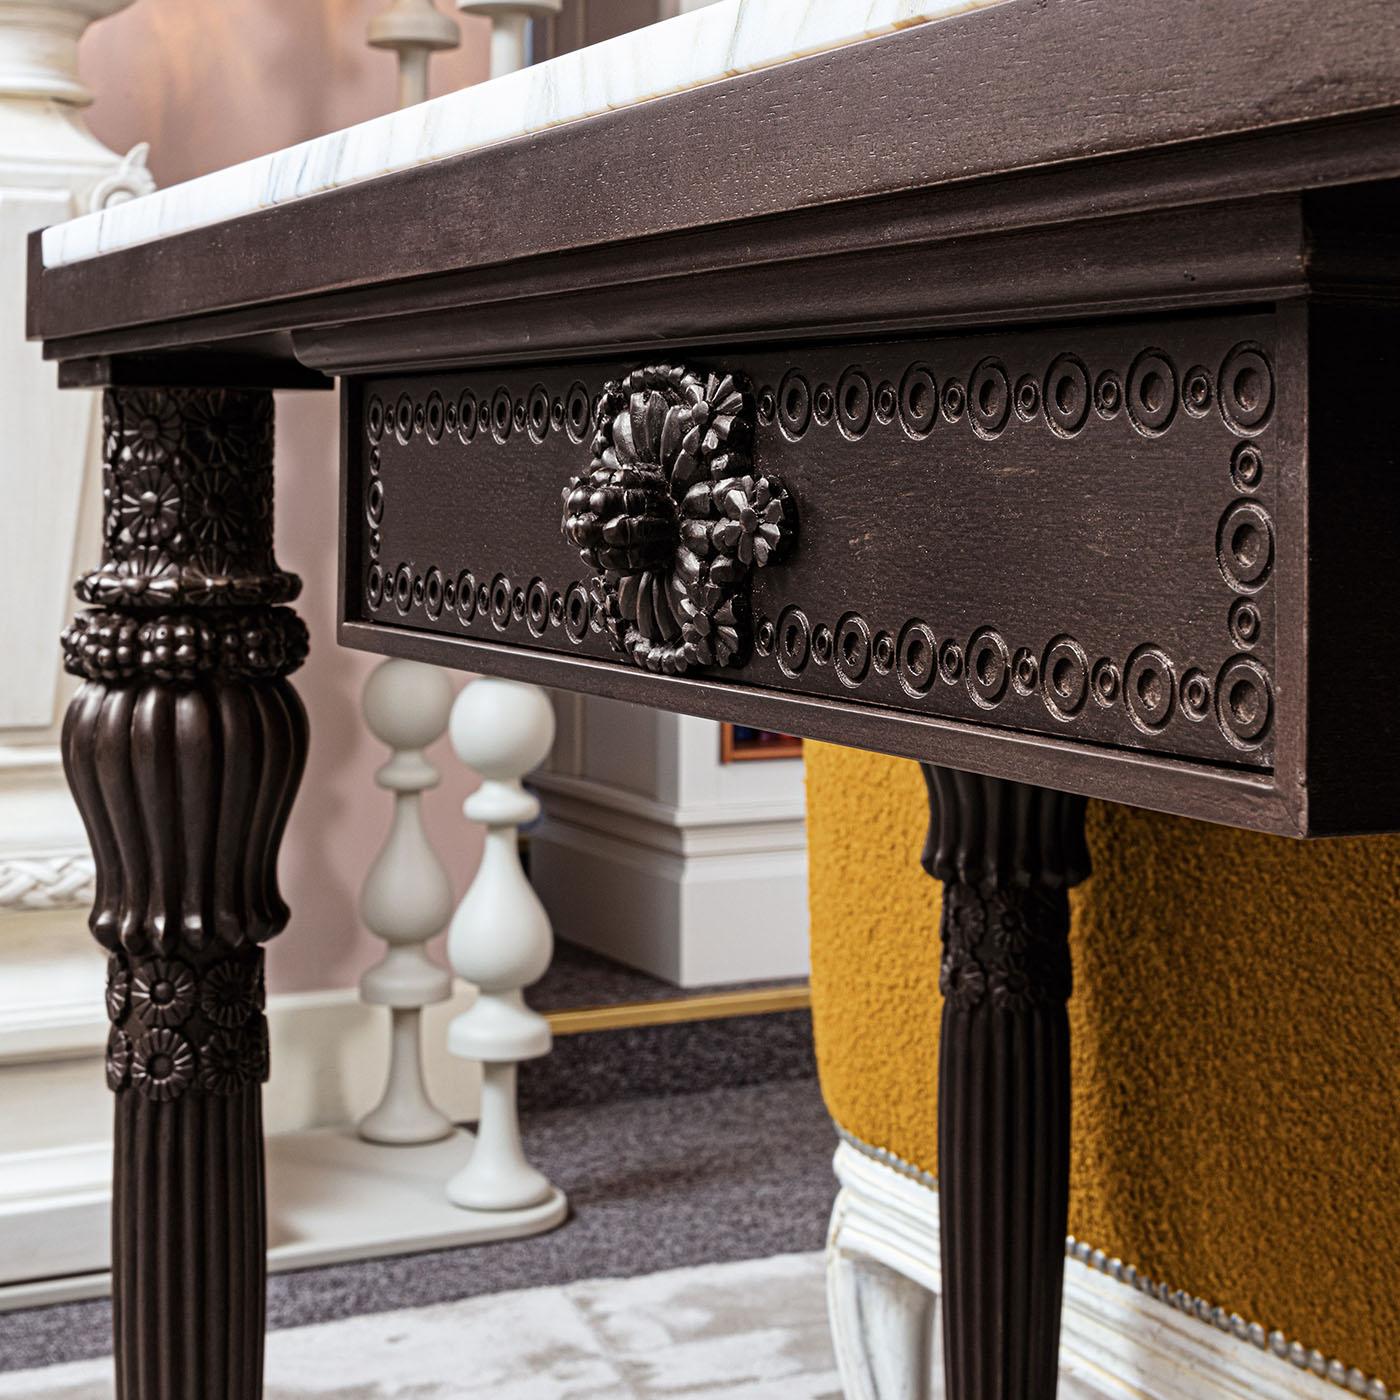 Hand-carved console with a solid wooden frame. The inlaid top is adorned with fine marble and mother-of-pearl inlays. This reinterpretation of an original deco piece makes this console timeless.